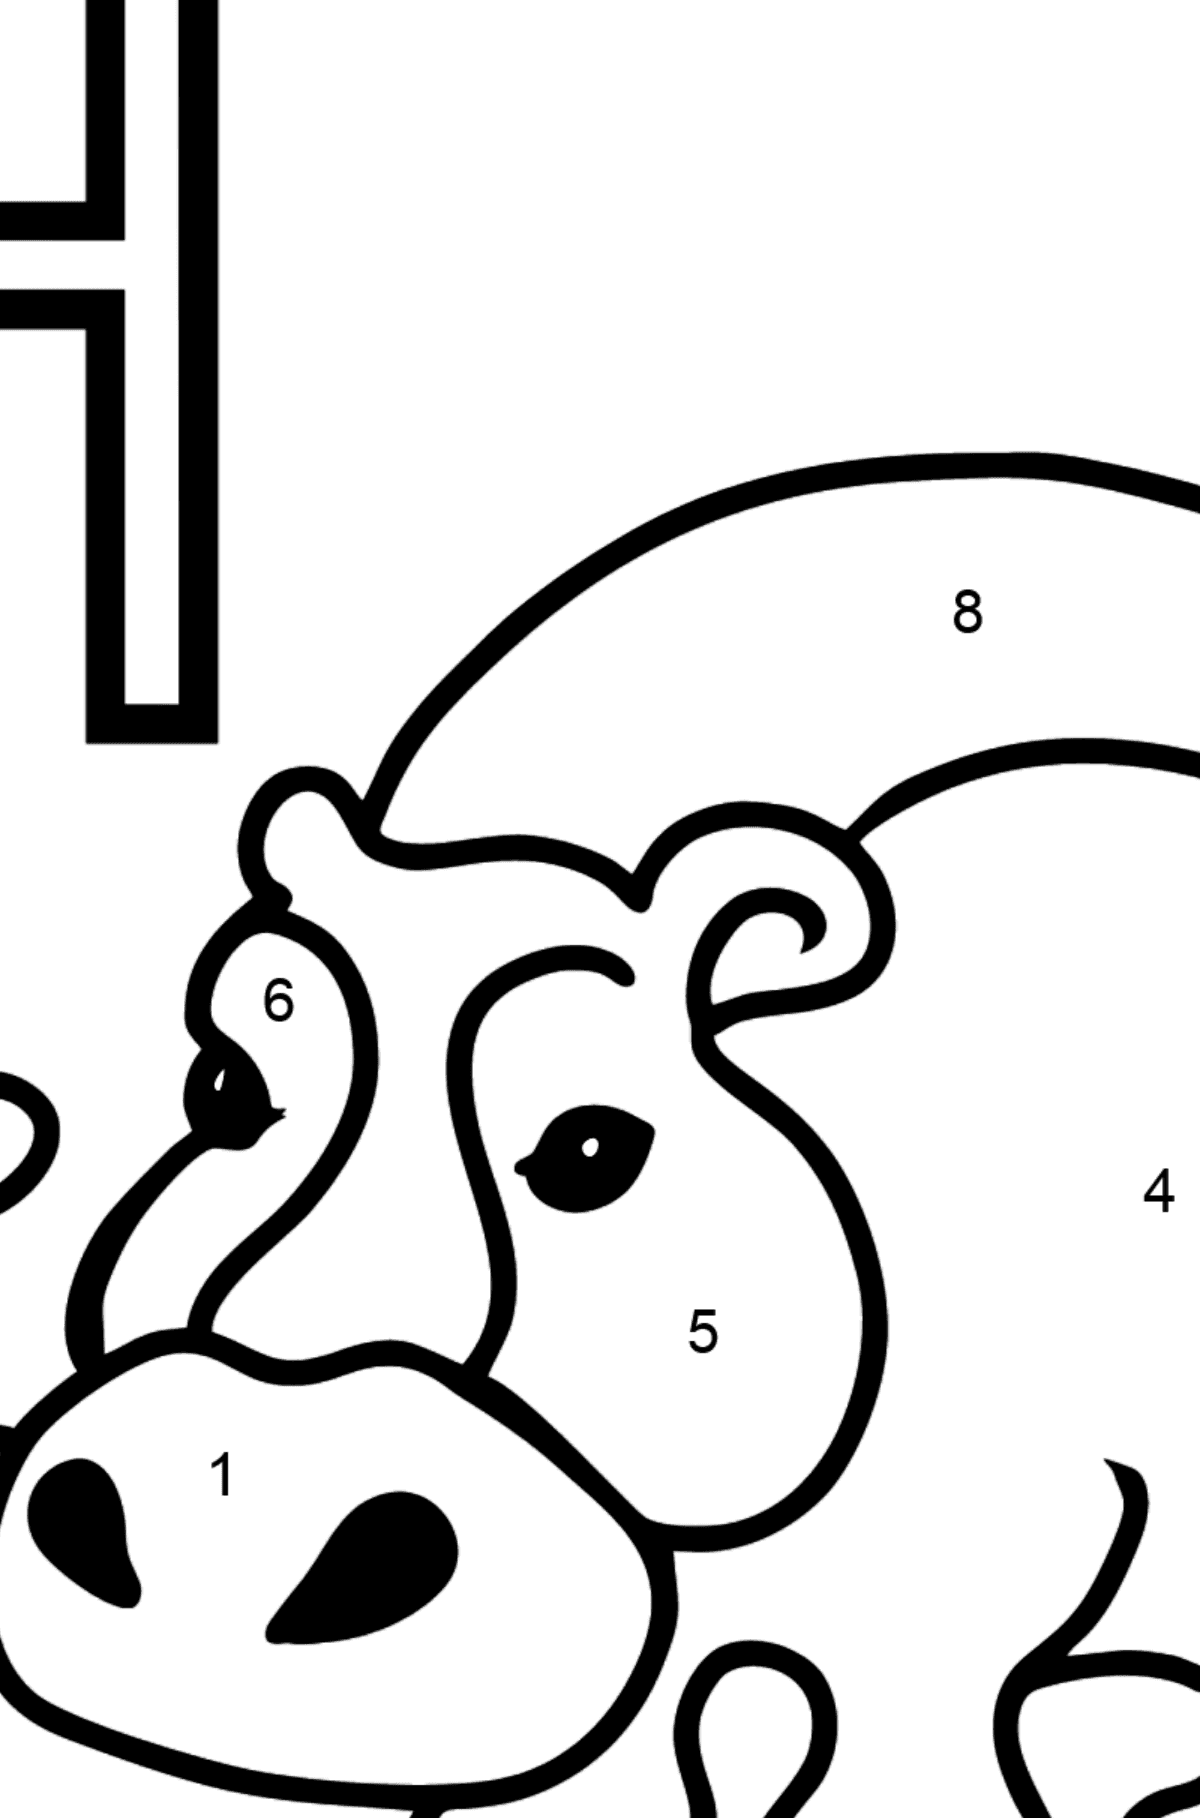 Spanish Letter H coloring pages - HIPOPÓTAMO - Coloring by Numbers for Kids